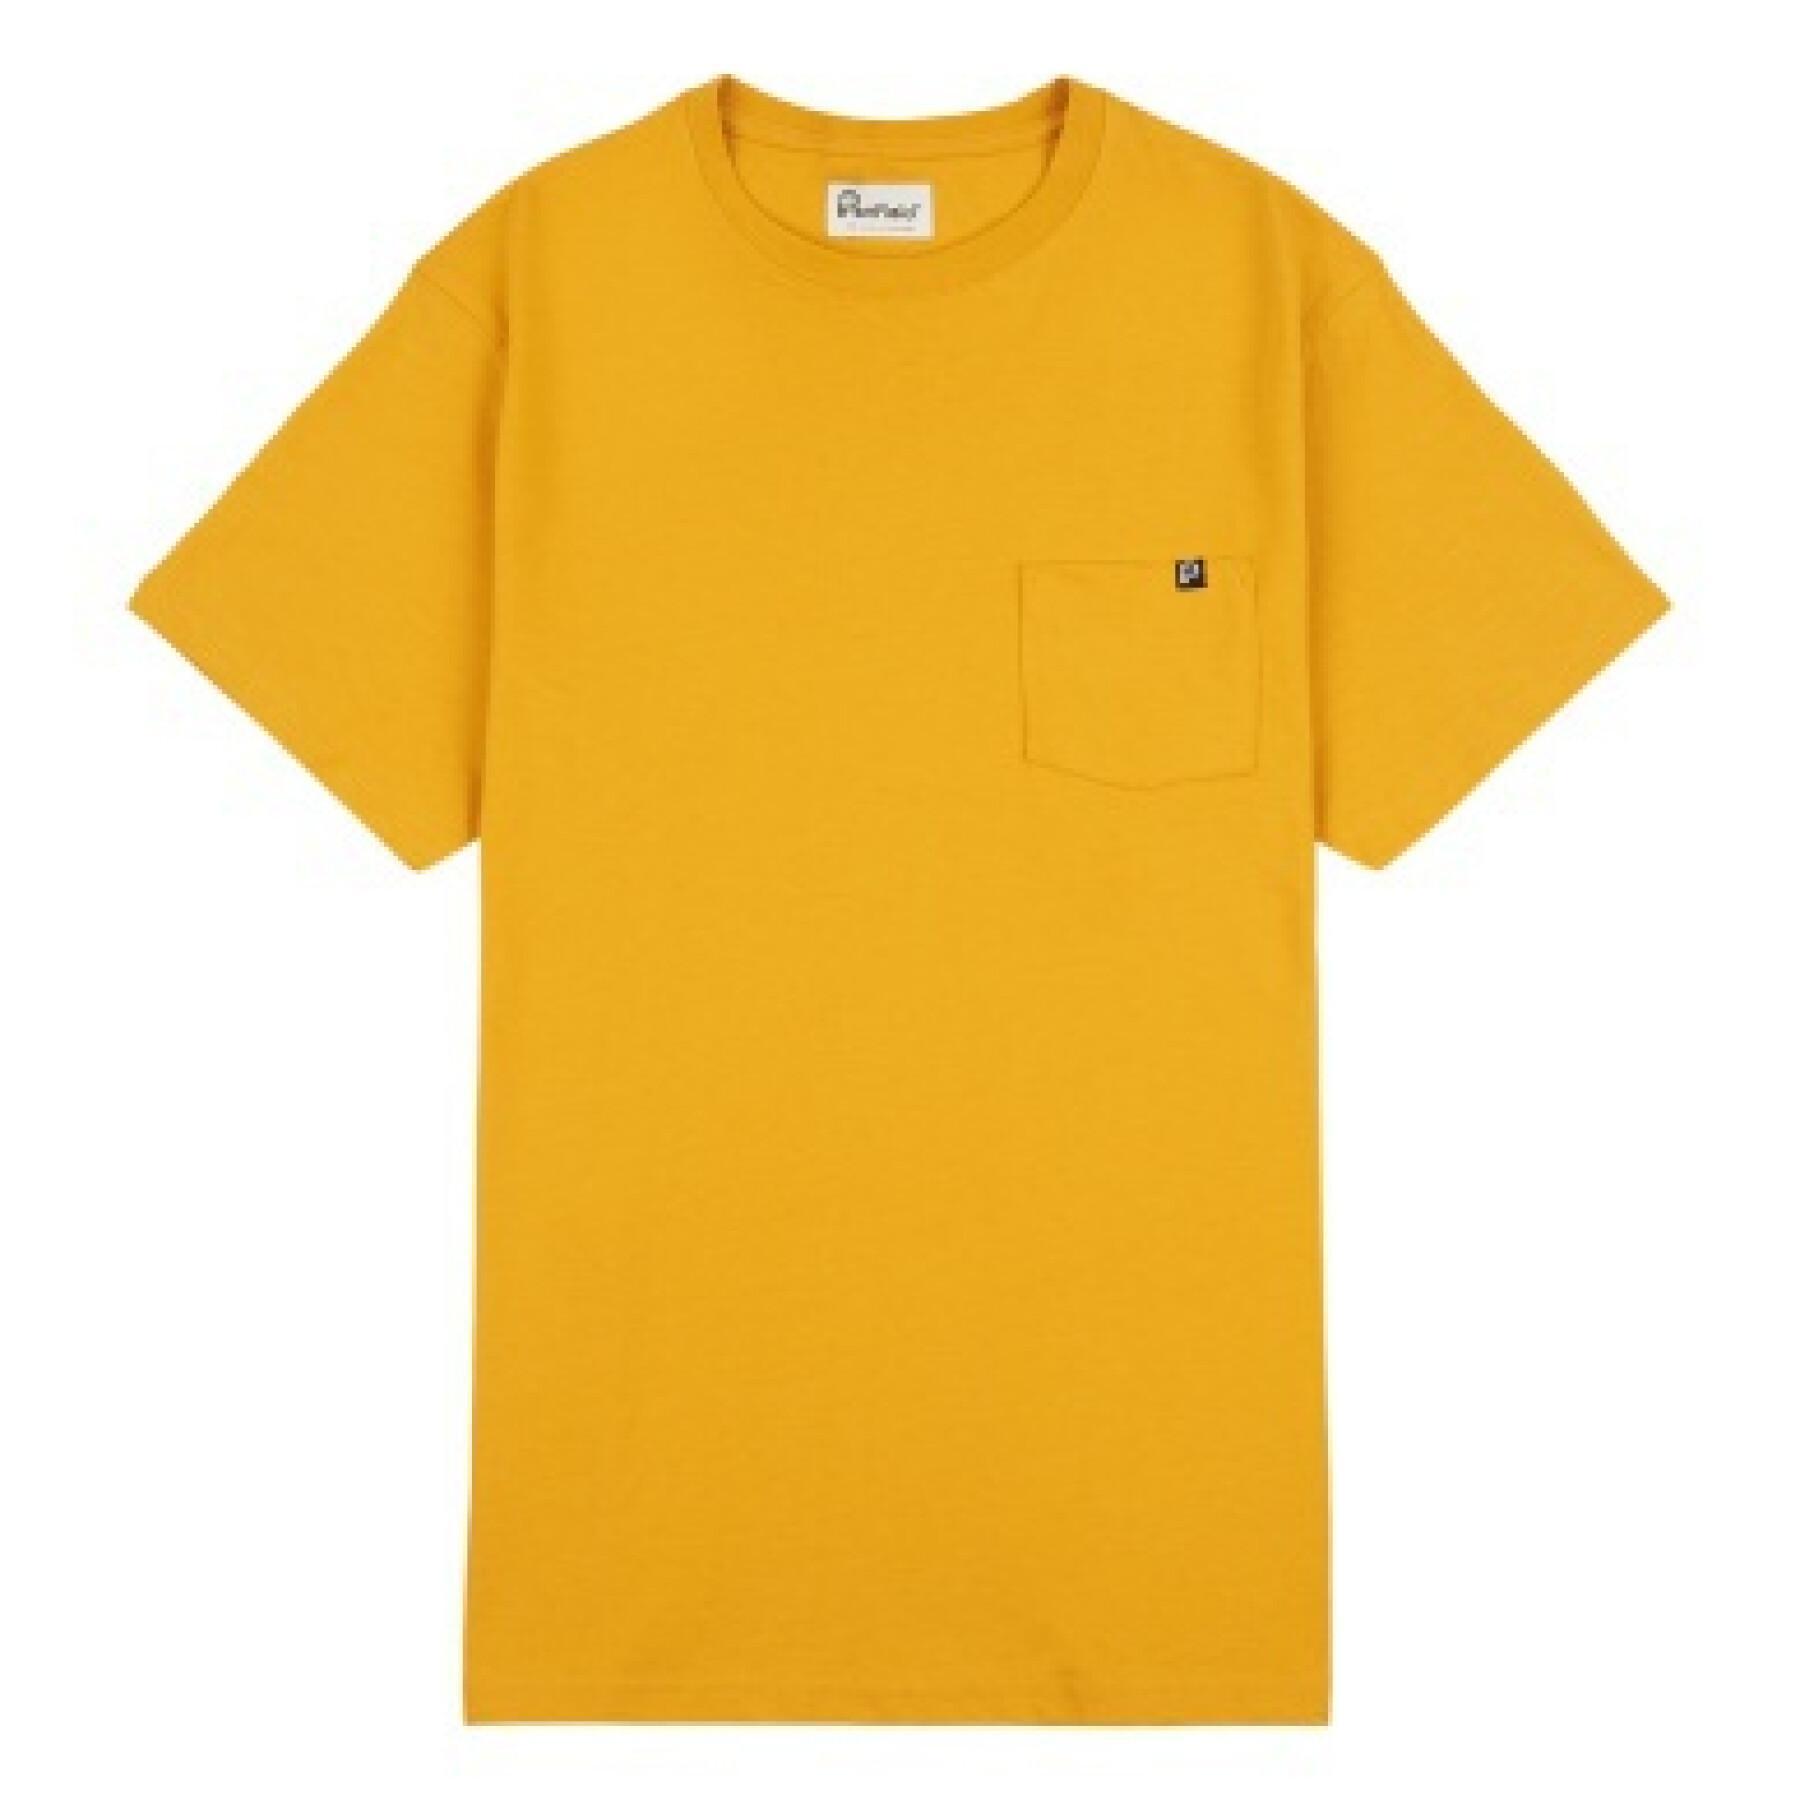 T-shirt with pocket Penfield chest